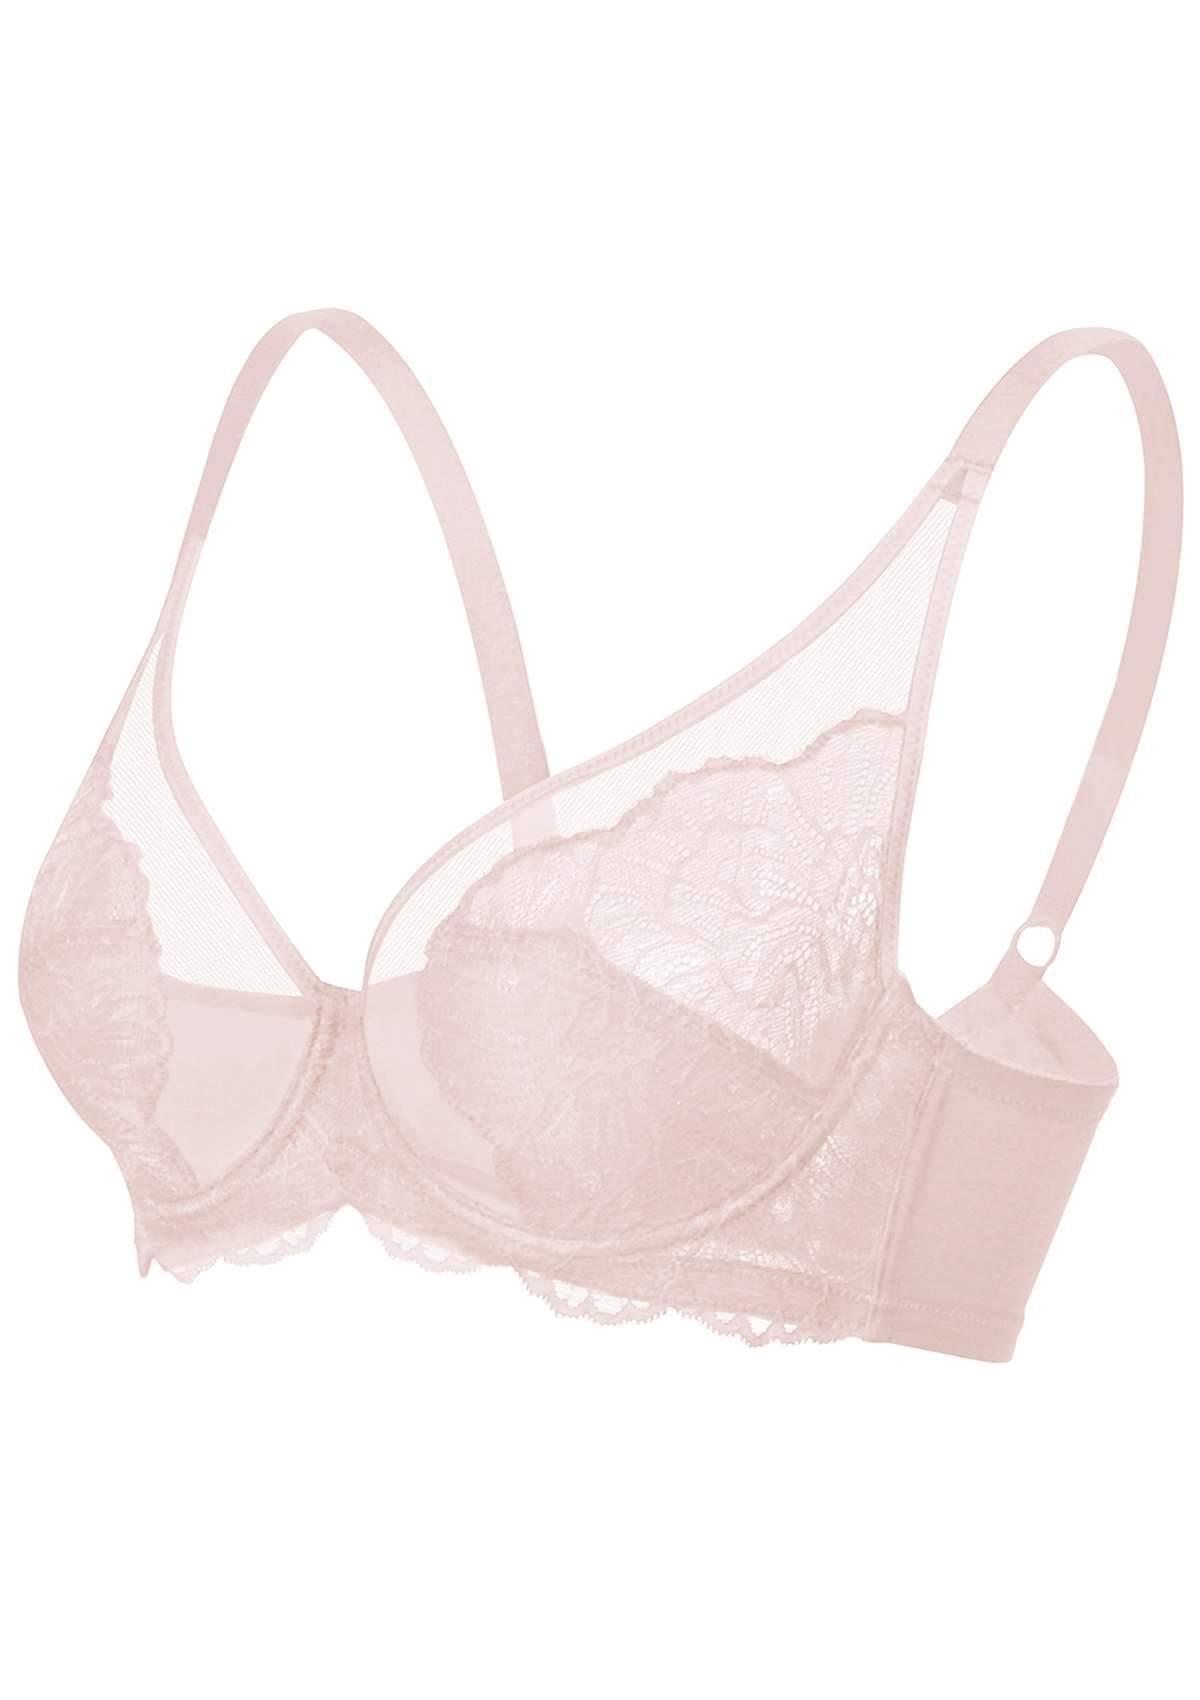 HSIA Blossom Lace Bra And Panties Set: Best Bra For Large Busts - Dark Pink / 40 / C